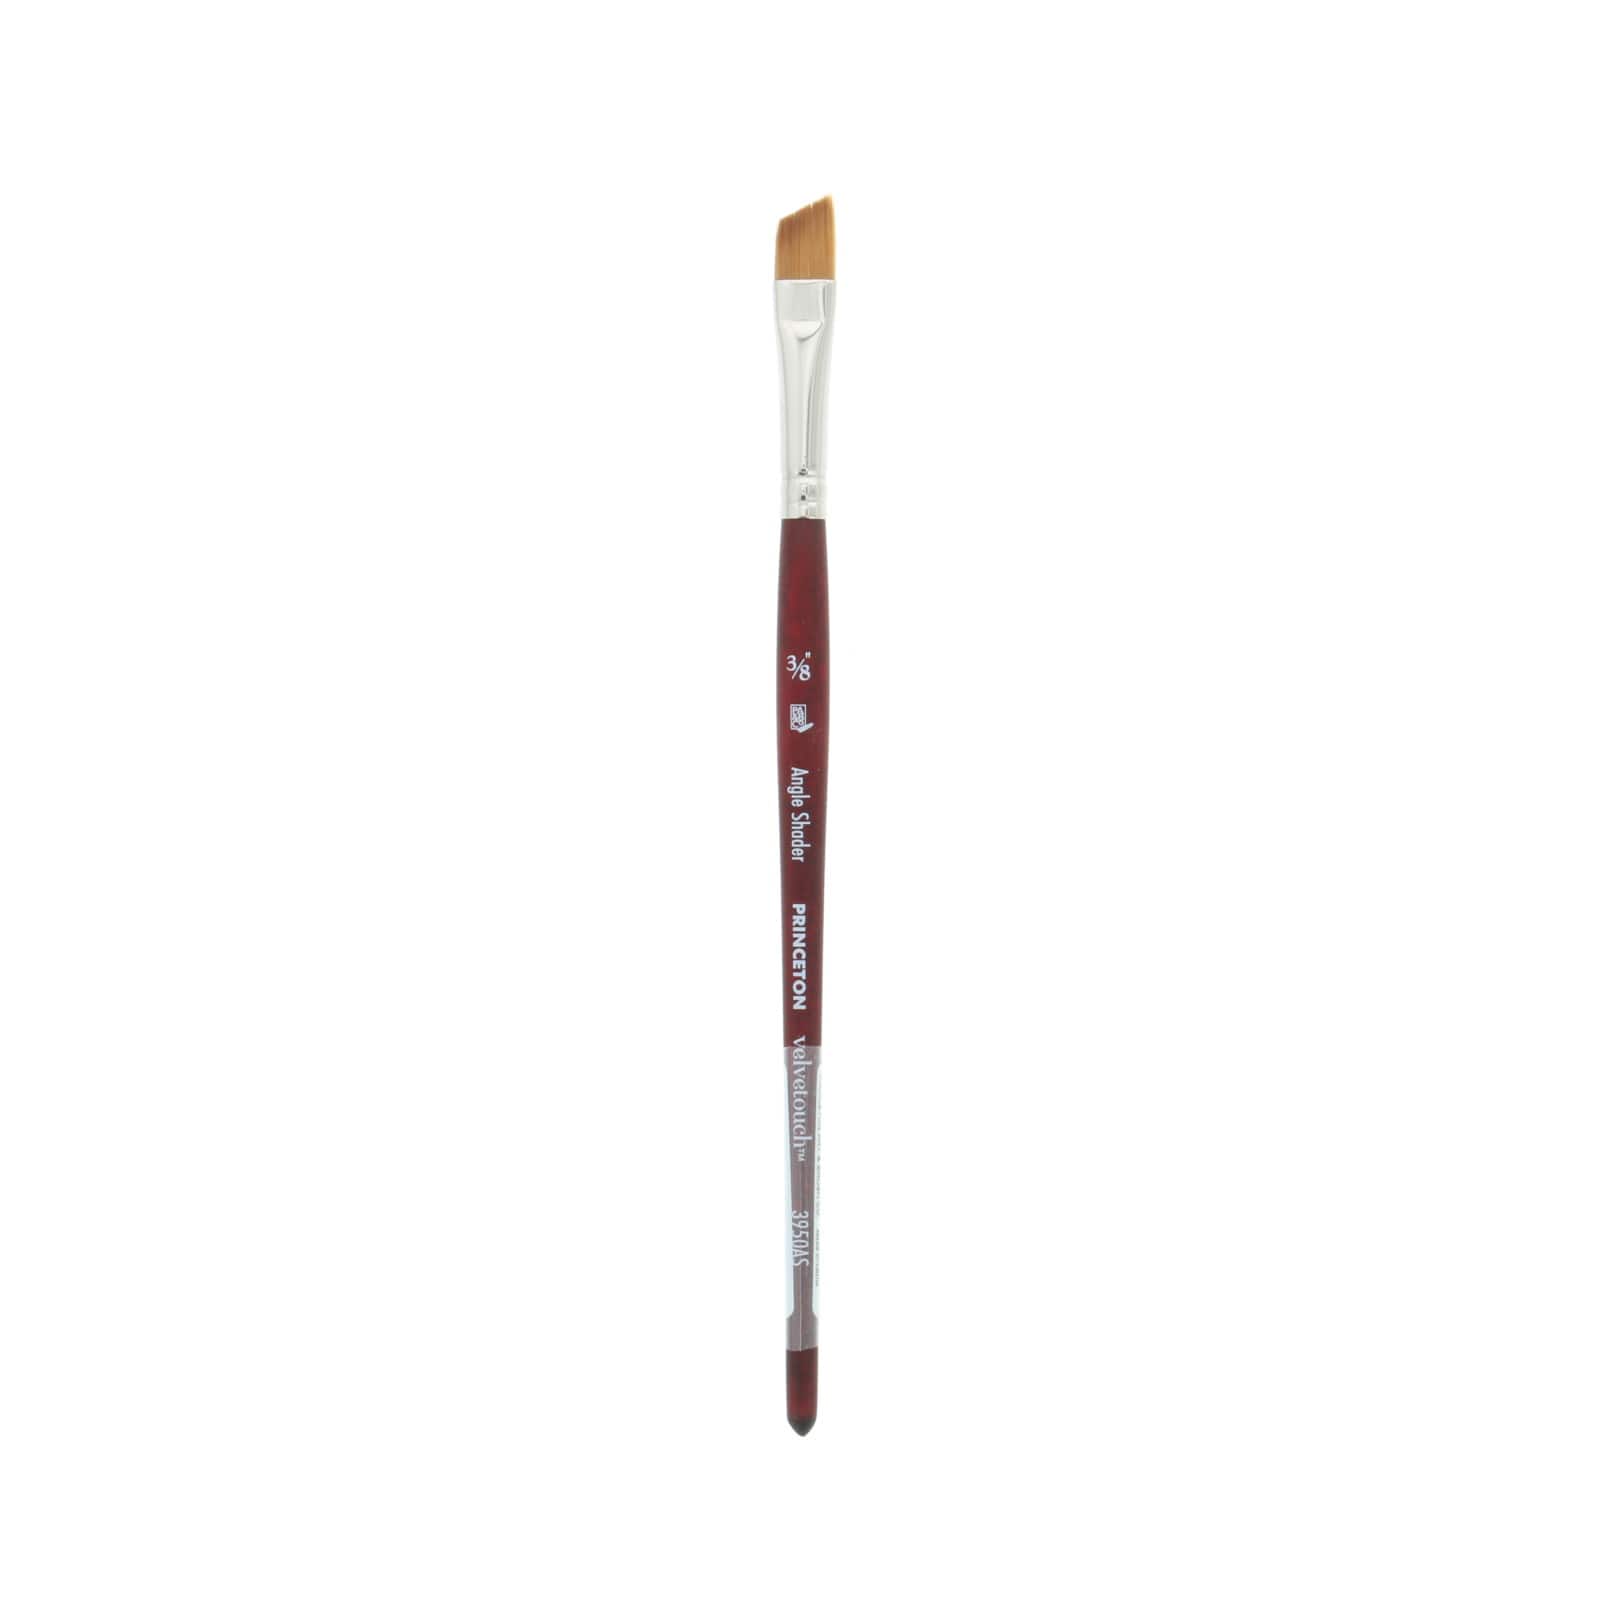 Princeton Brush Velvetouch Mixed Media 3950 series Angle Shader size 1/2 -  Wet Paint Artists' Materials and Framing